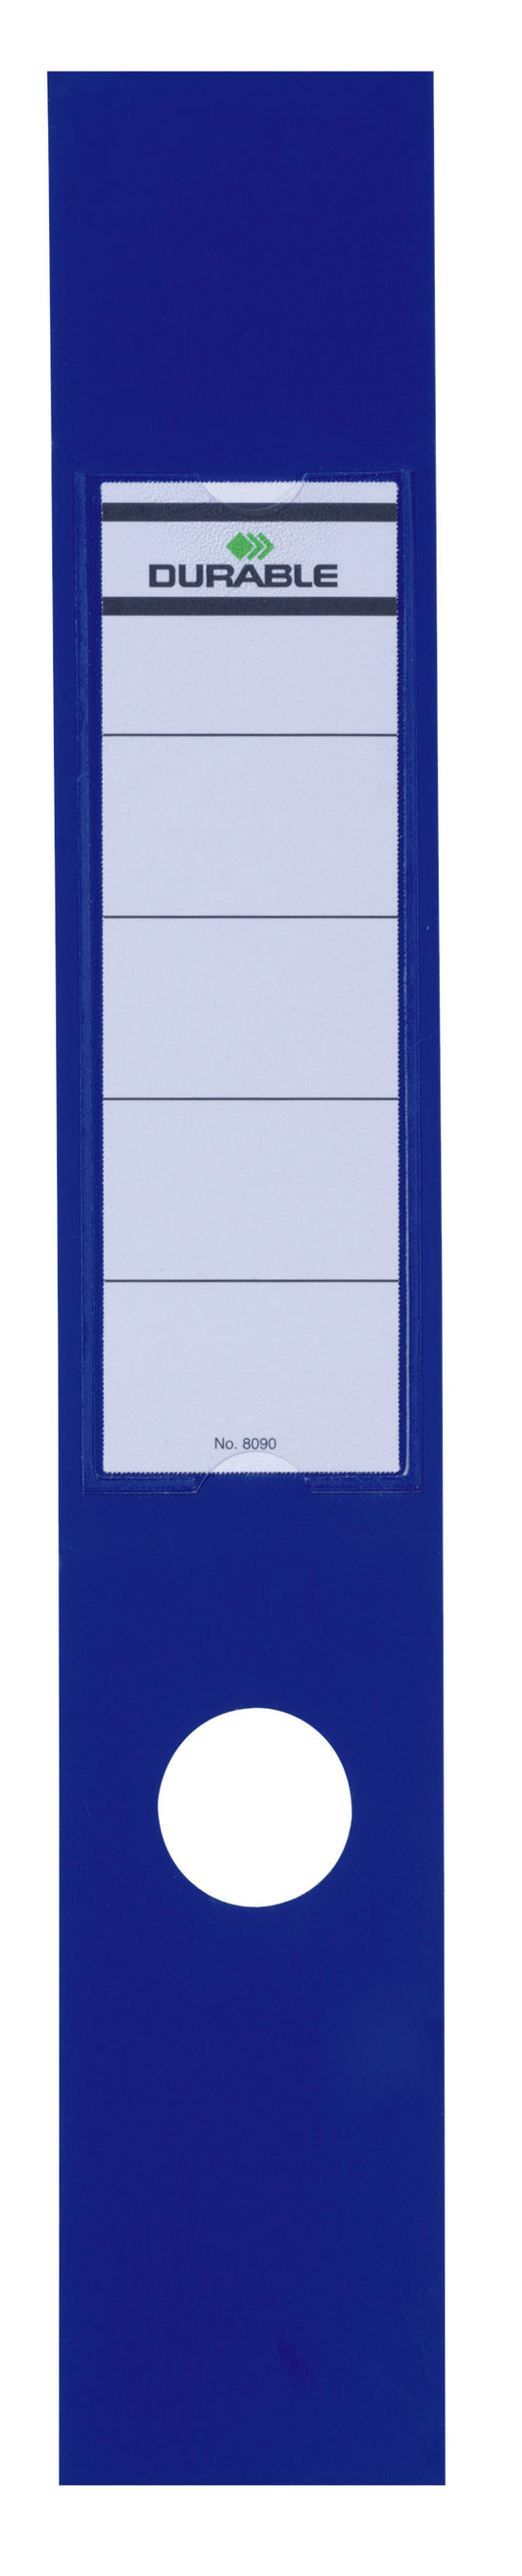 Durable Ordofix Lever Arch File Spine Label PVC 60x390mm Blue (Pack 10) 809006 - NWT FM SOLUTIONS - YOUR CATERING WHOLESALER